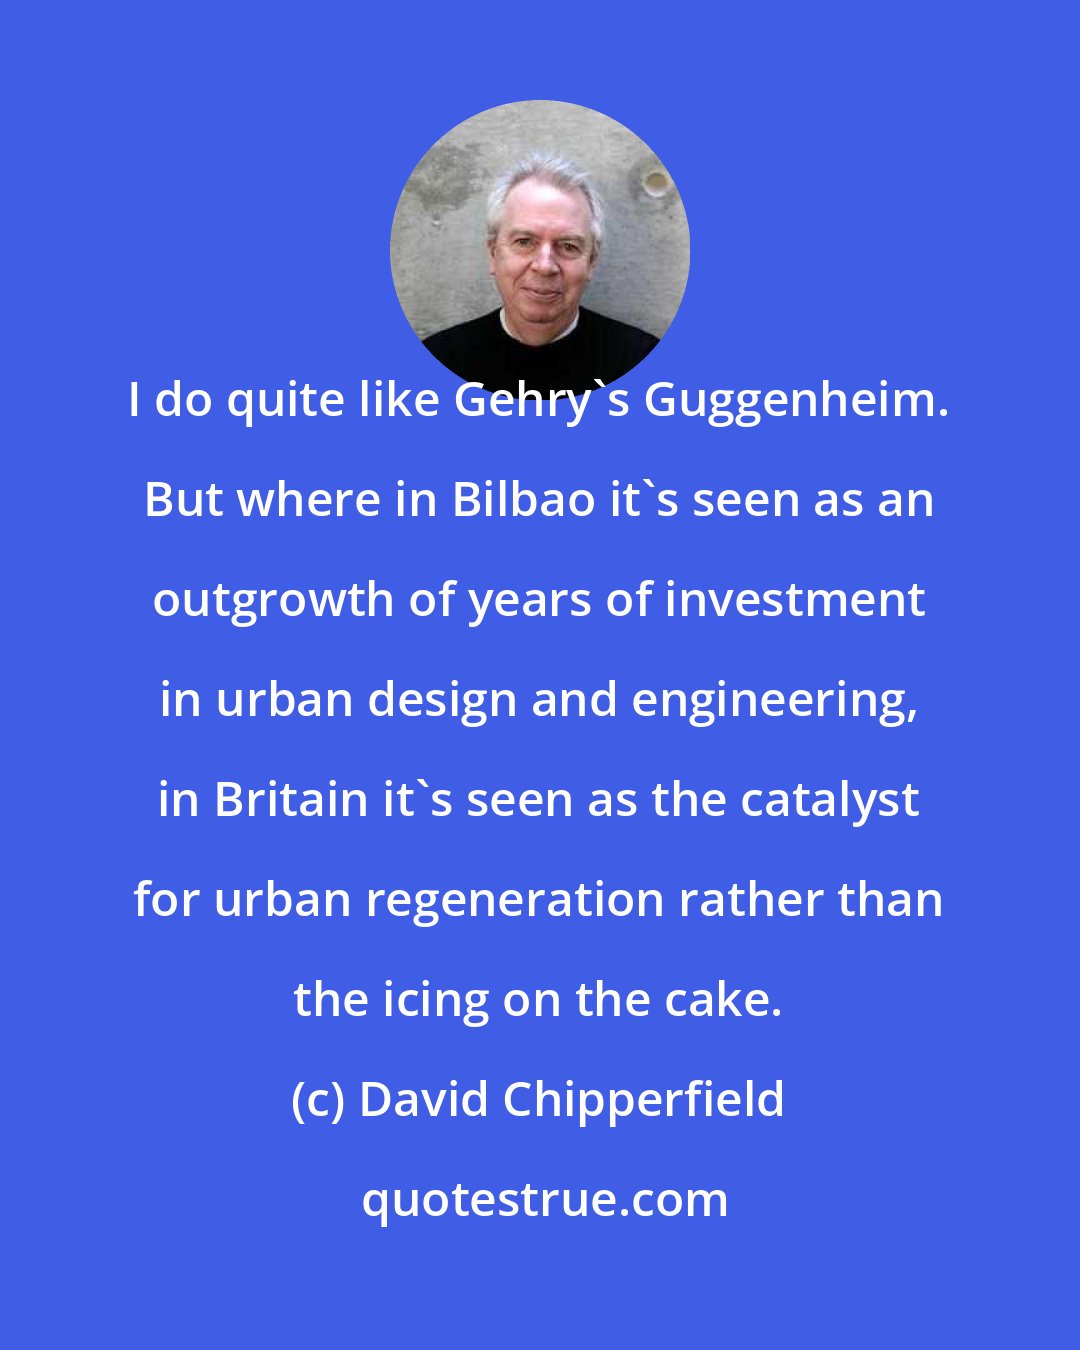 David Chipperfield: I do quite like Gehry's Guggenheim. But where in Bilbao it's seen as an outgrowth of years of investment in urban design and engineering, in Britain it's seen as the catalyst for urban regeneration rather than the icing on the cake.